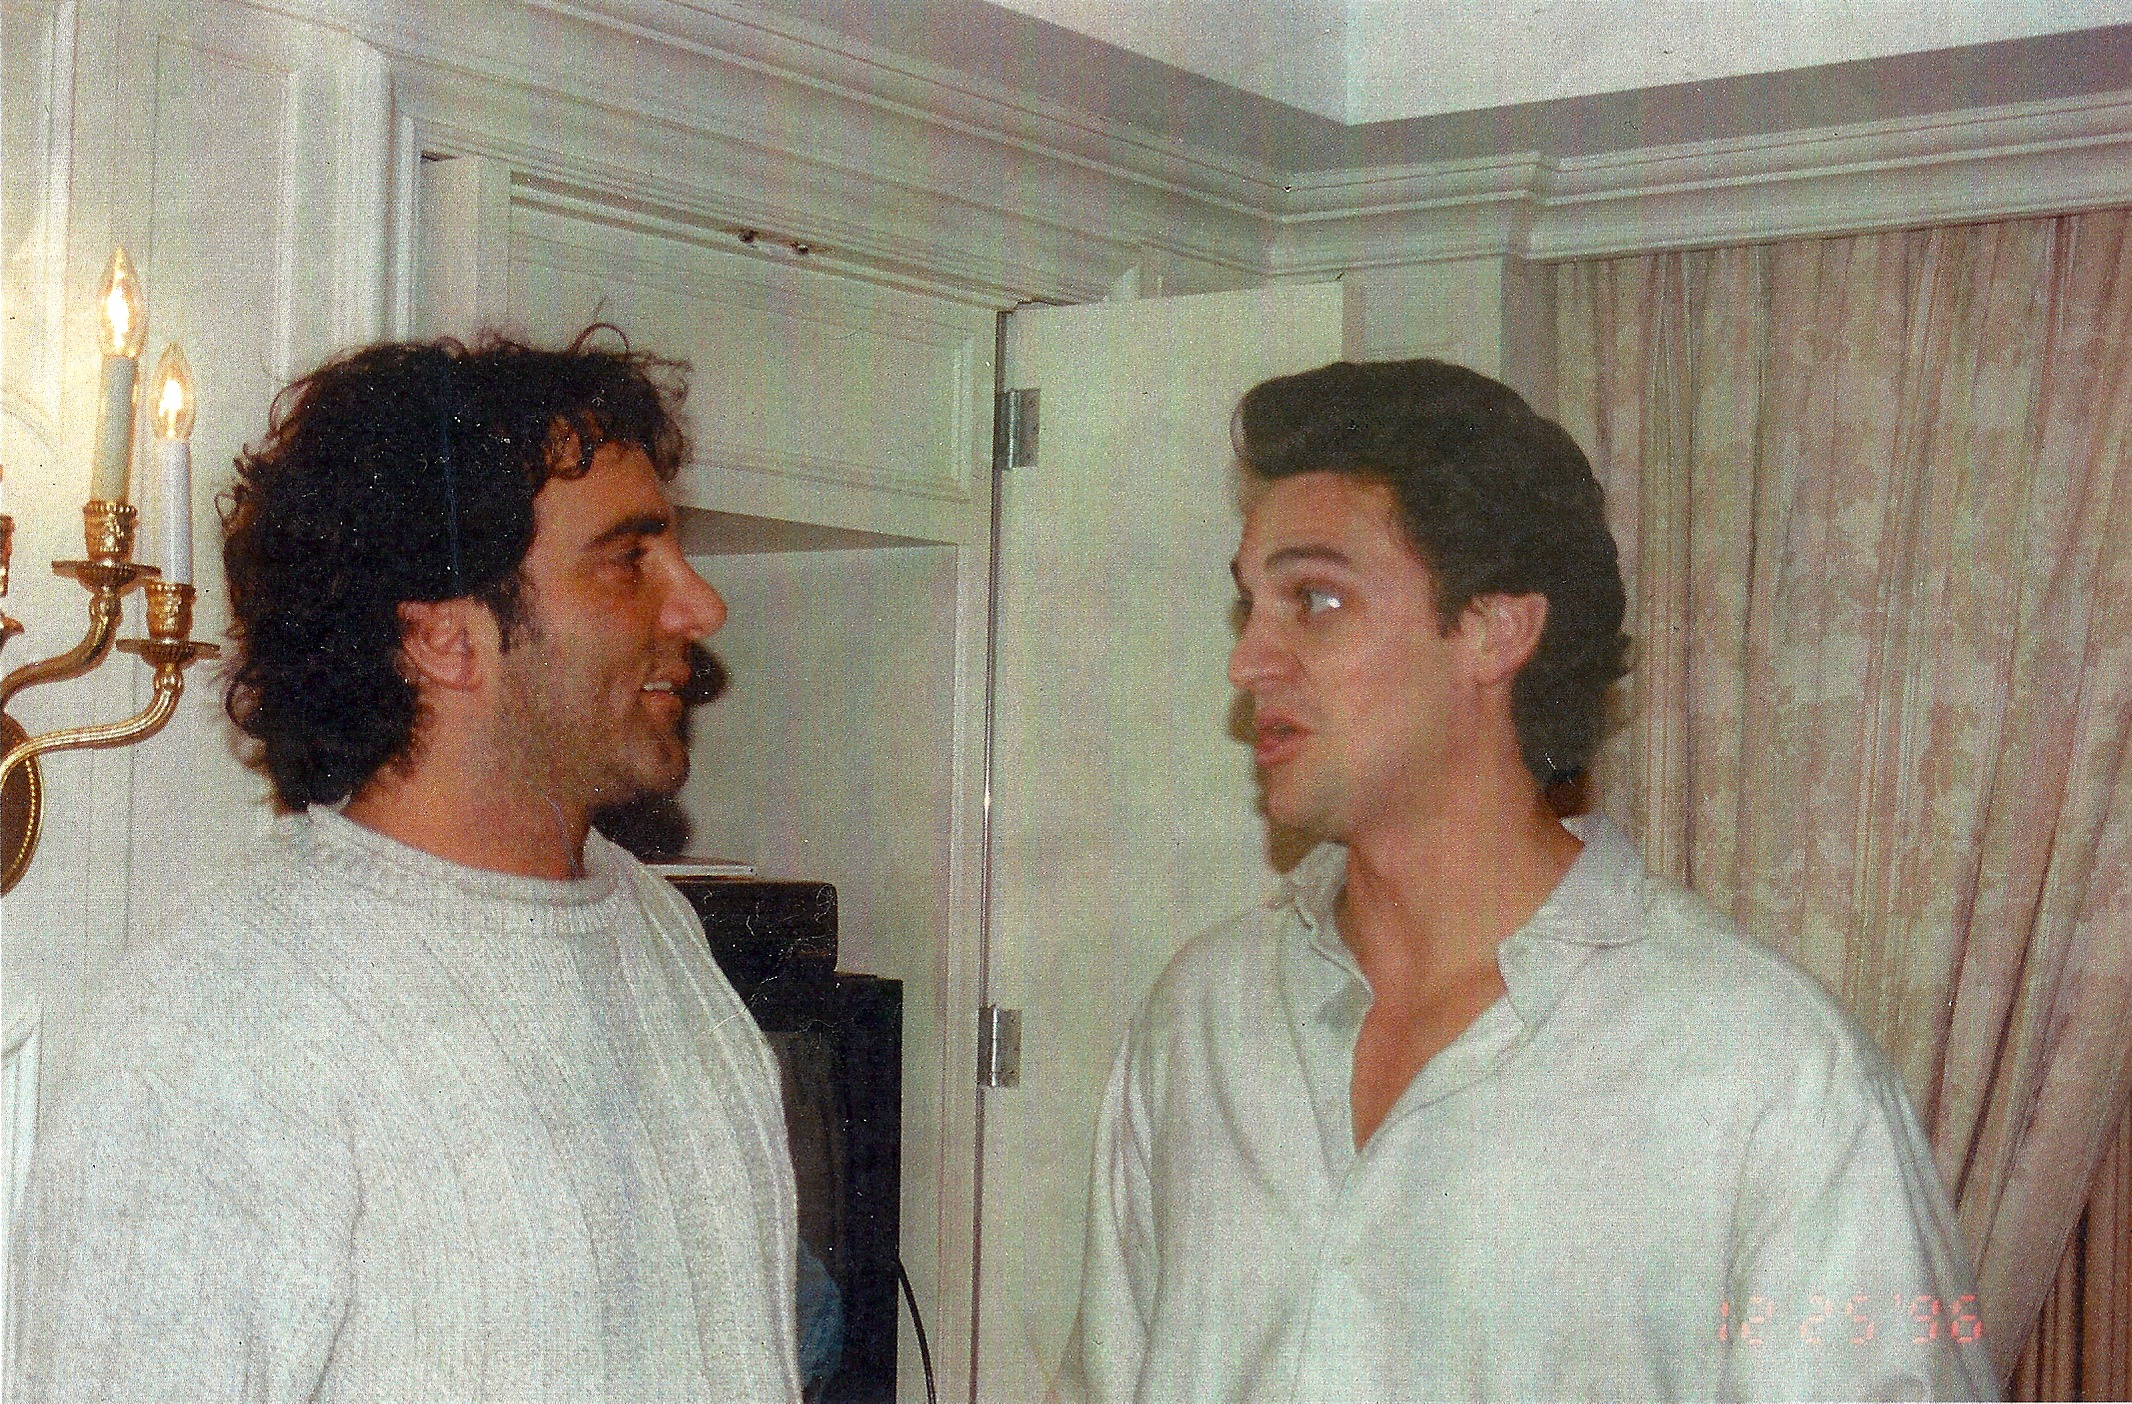 From left to right Richard D'Alessandro and George Palermo as Tony Soleito on the set of the Soap Opera 